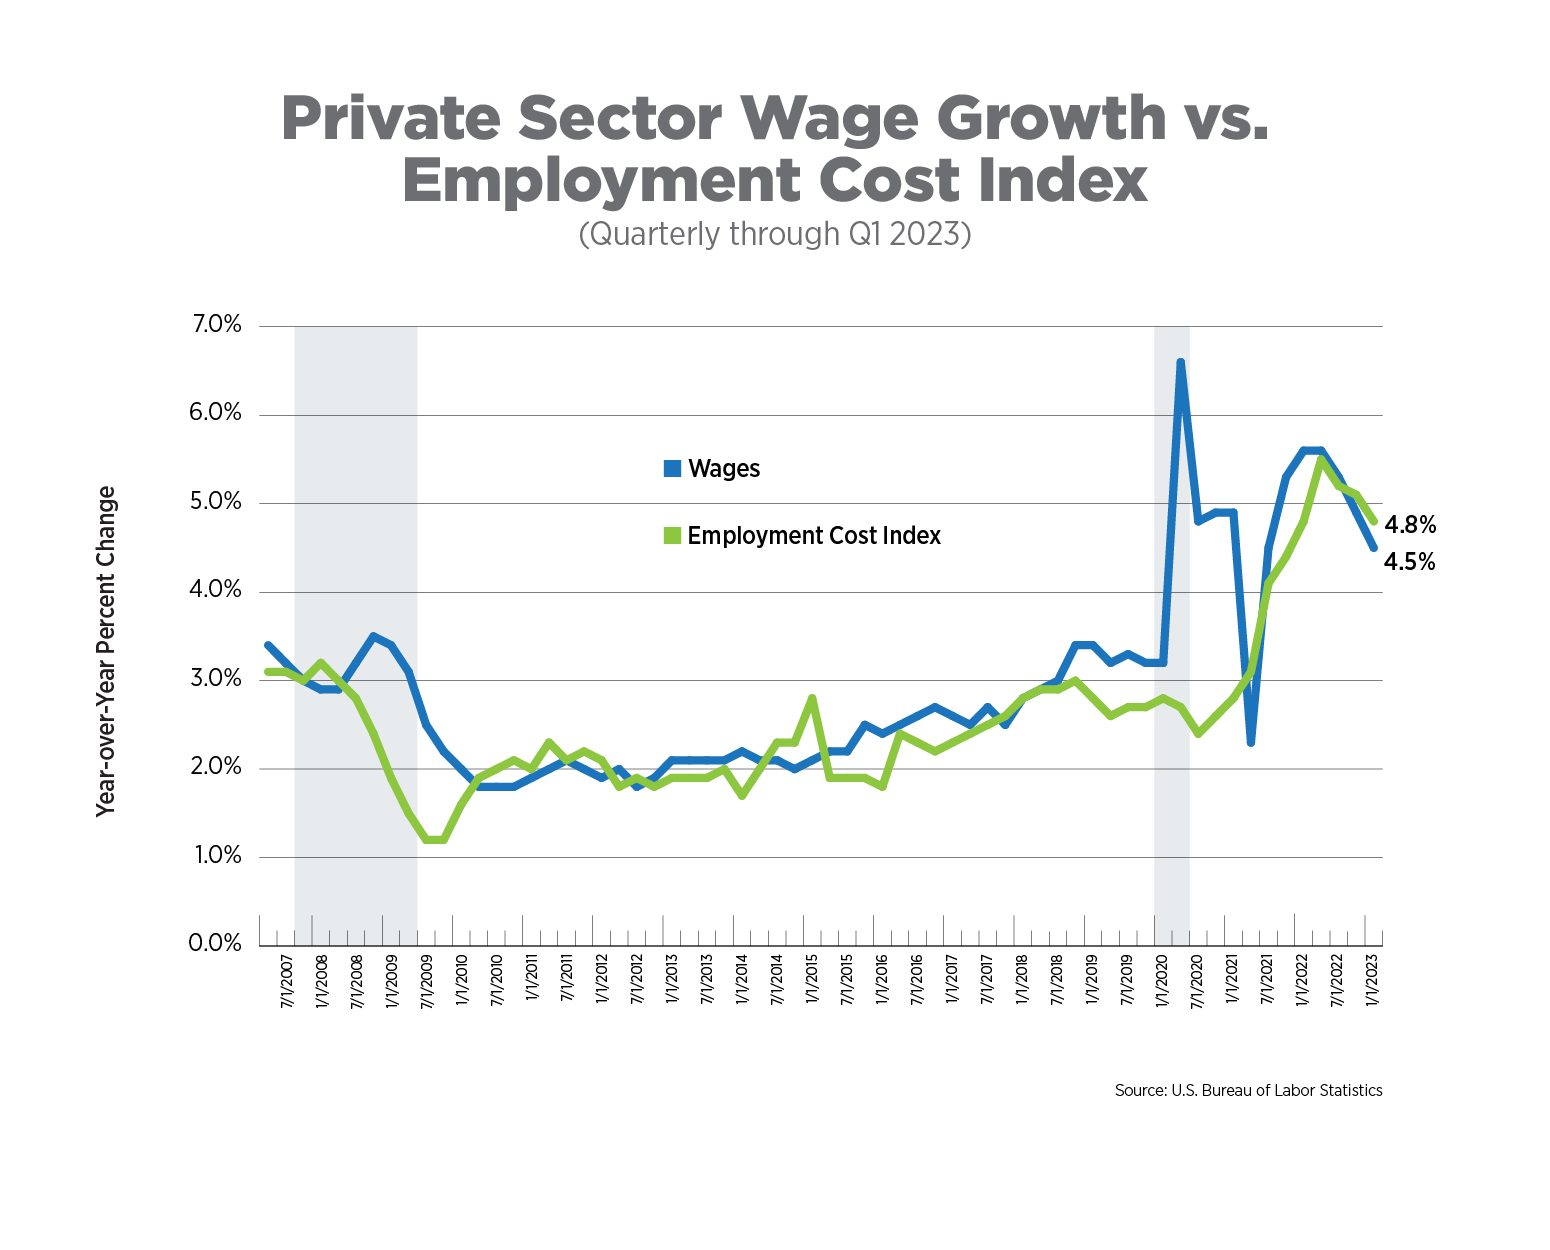 Wage Growth vs. Employment Cost Index, Q1 2023